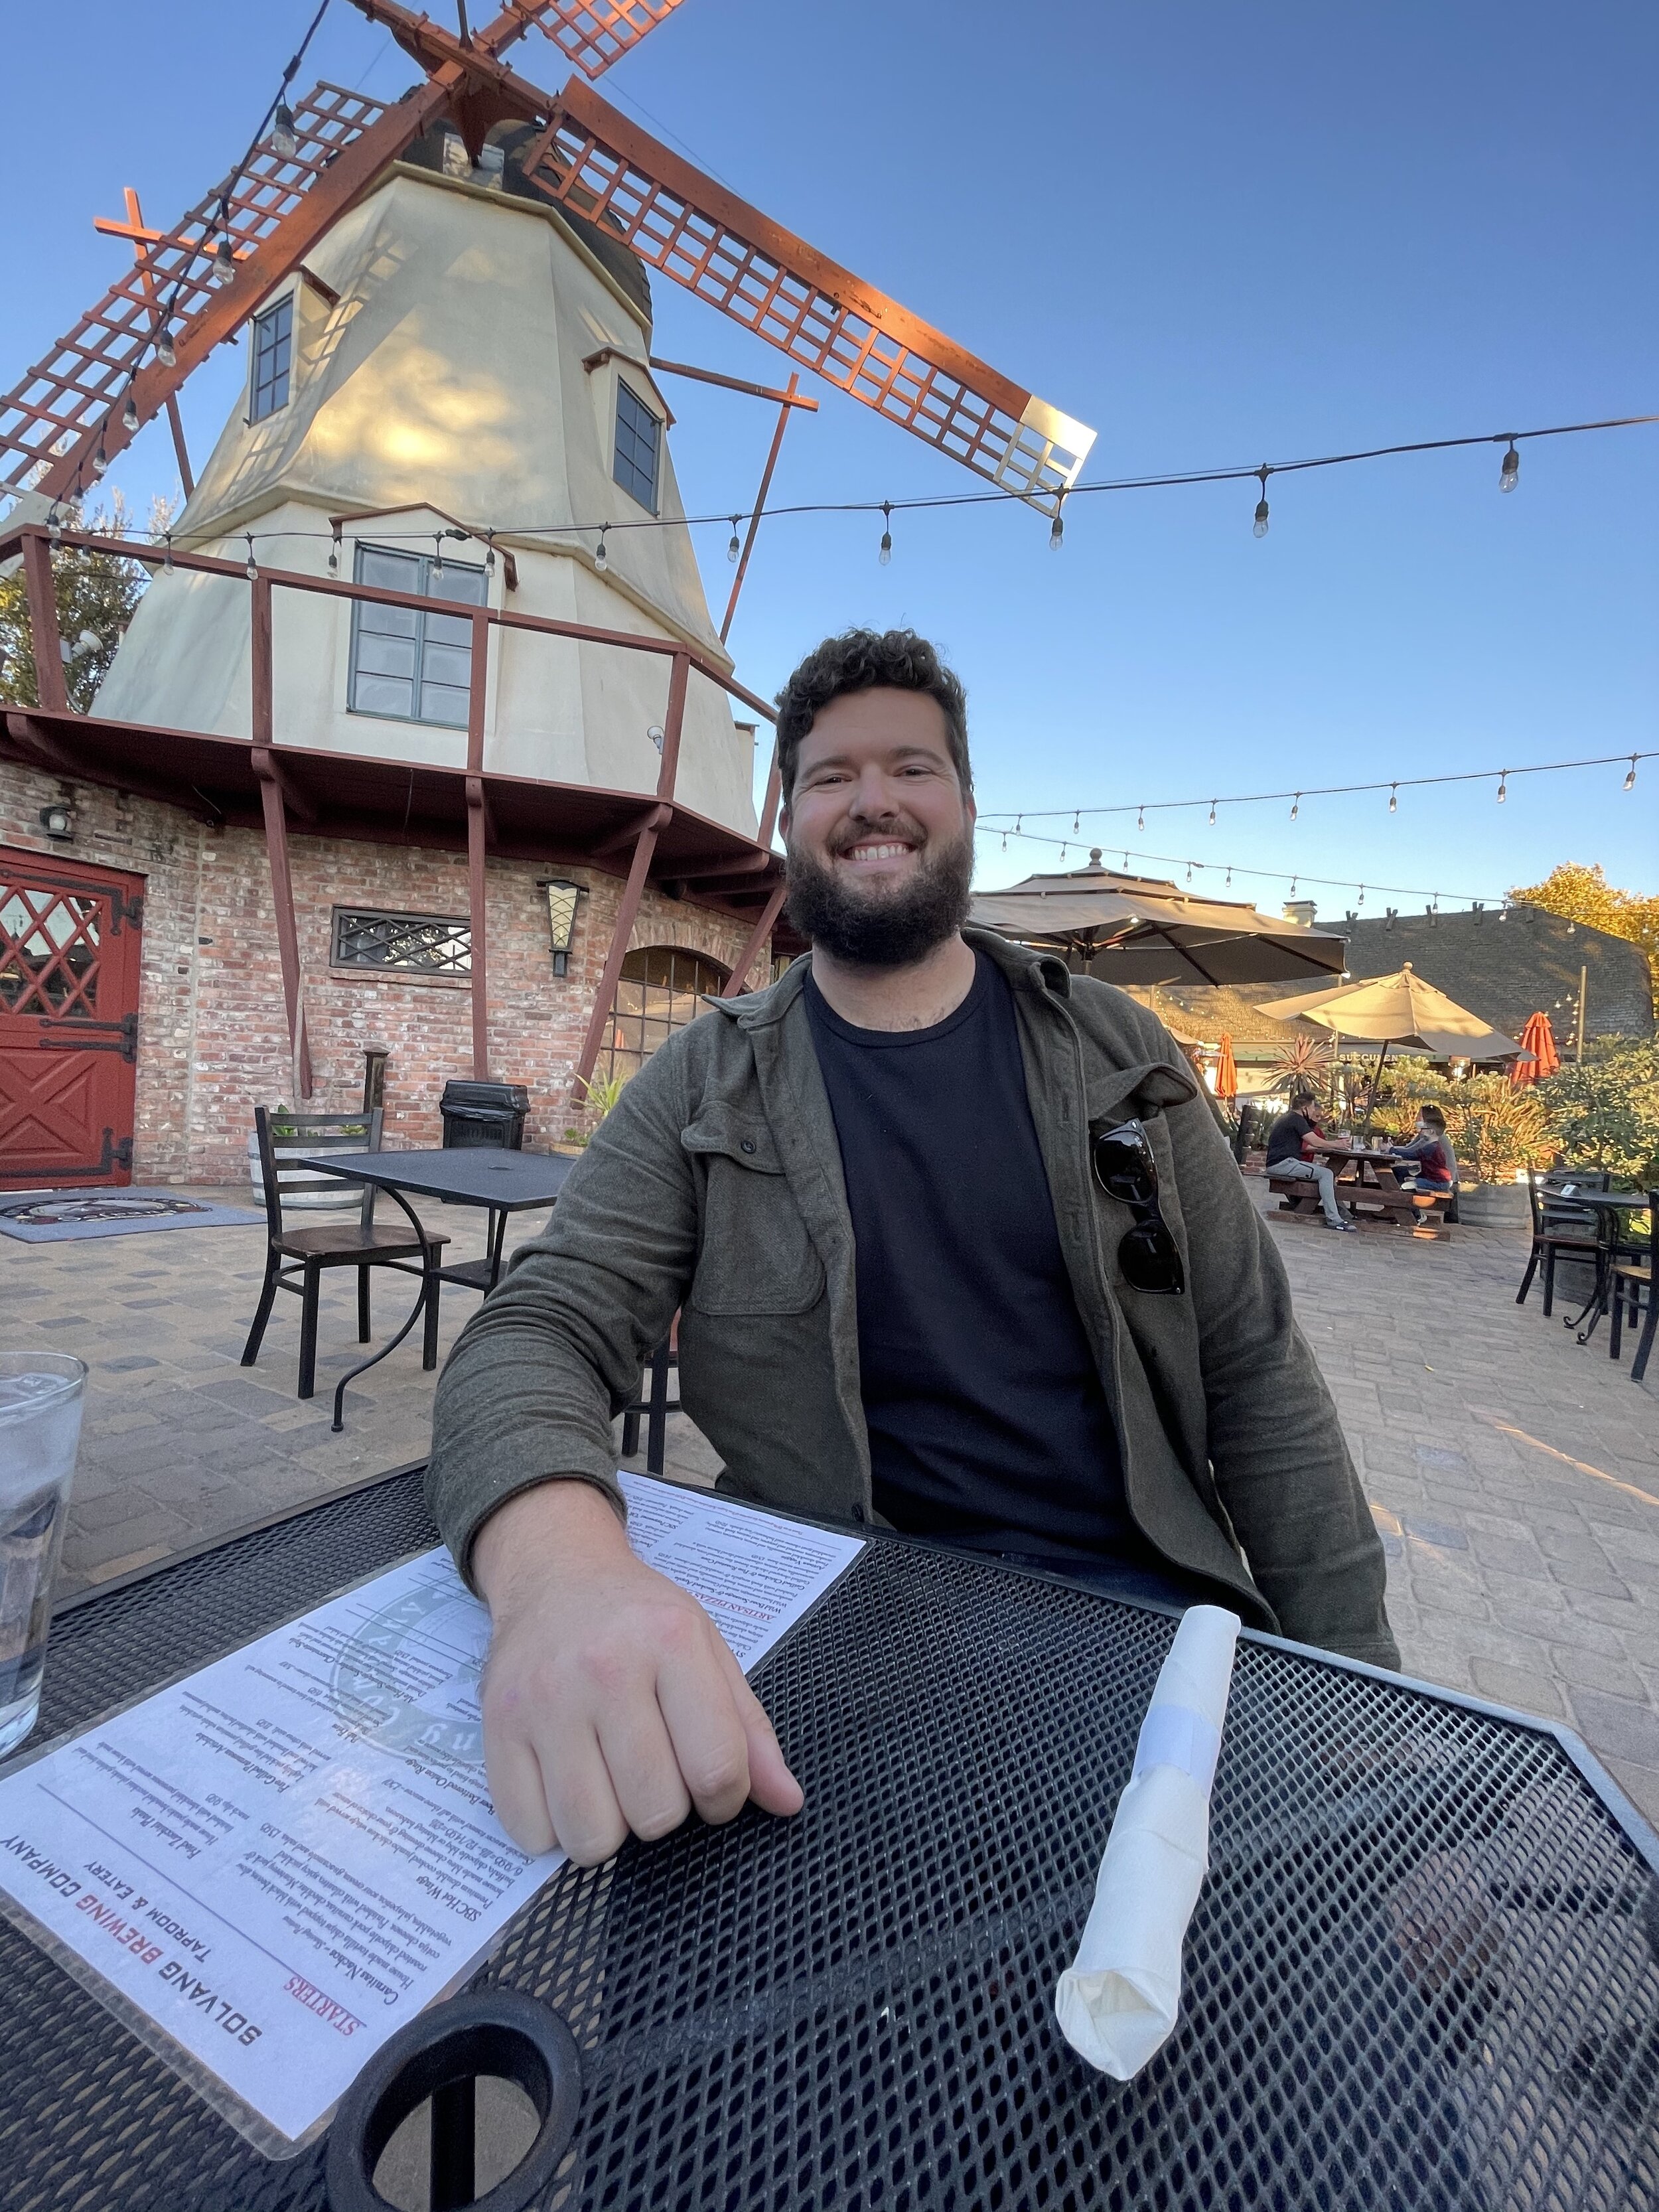 solvang  travel guide, what to do in solvang, where to eat or dine, wineries, hikes, lments of style, la road trip, 2 hour drive, la blogger,  saint ynez valley, santa barbara, montecito, where to stay, hotels,  los olivos, buellerton